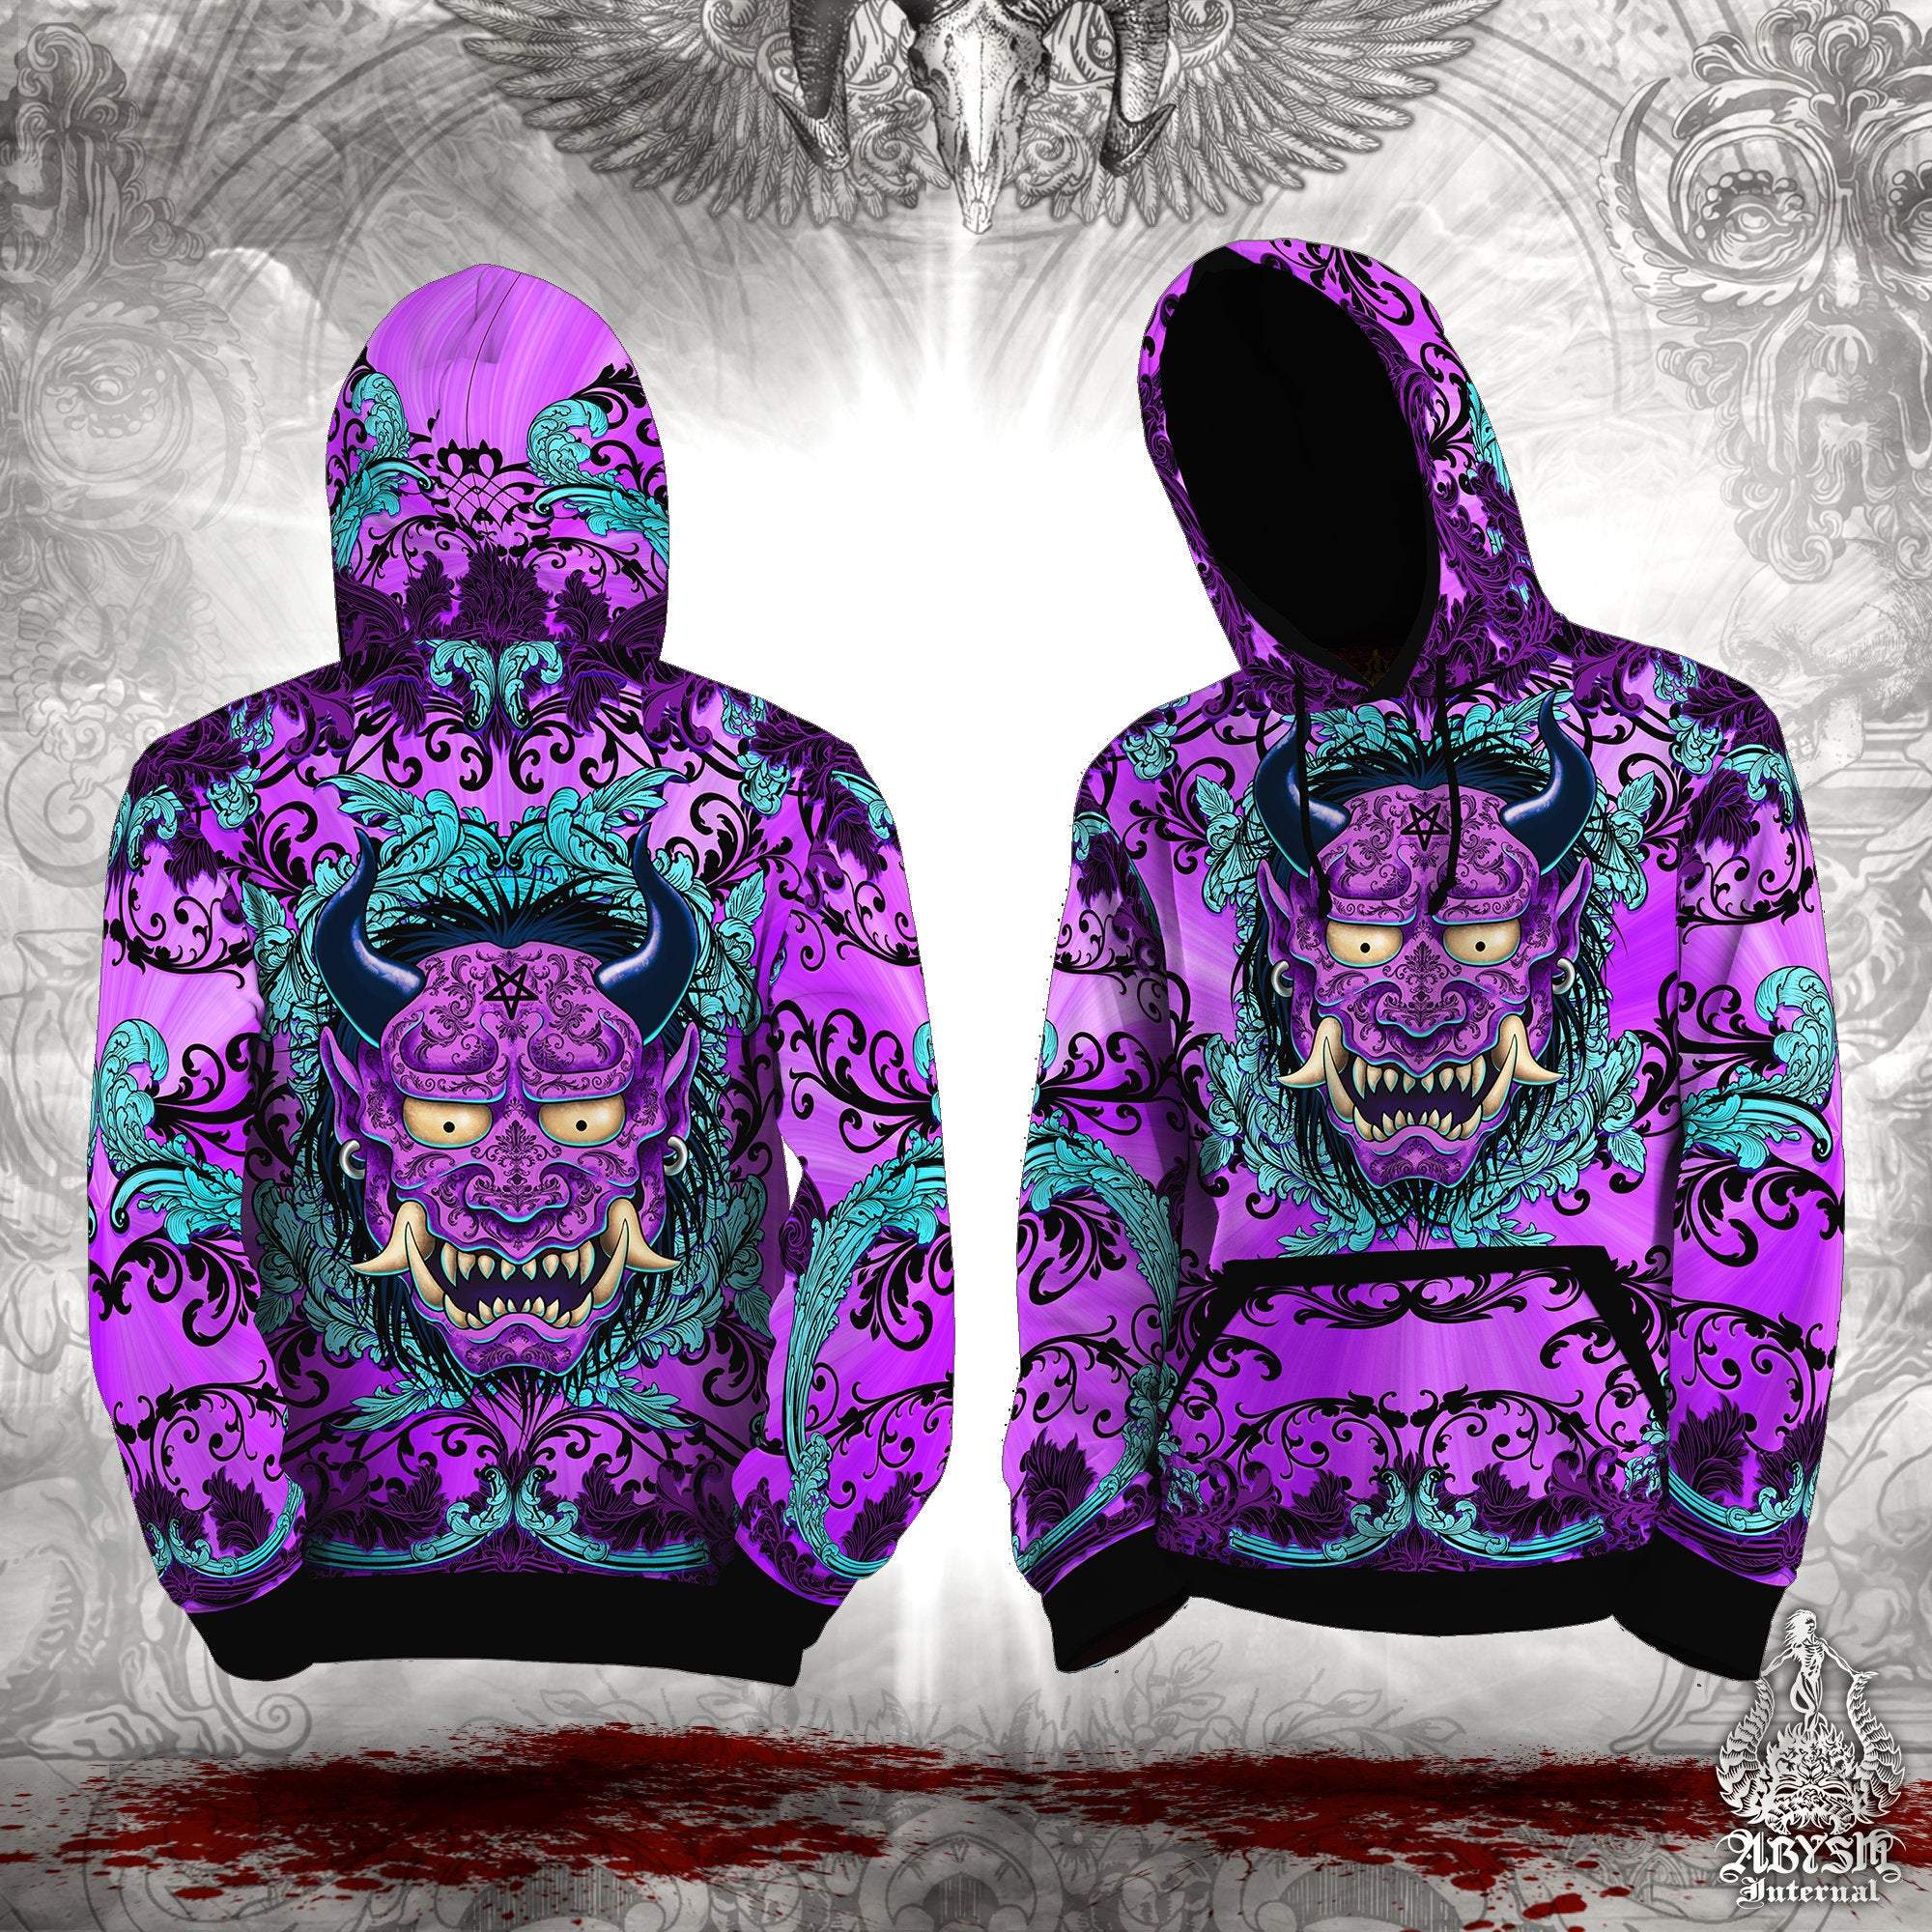 Oni Hoodie, Pastel Goth Streetwear, Rave and Street Outfit, Japanese Demon, Alternative Clothing, Unisex - Dark Psychedelic - Abysm Internal